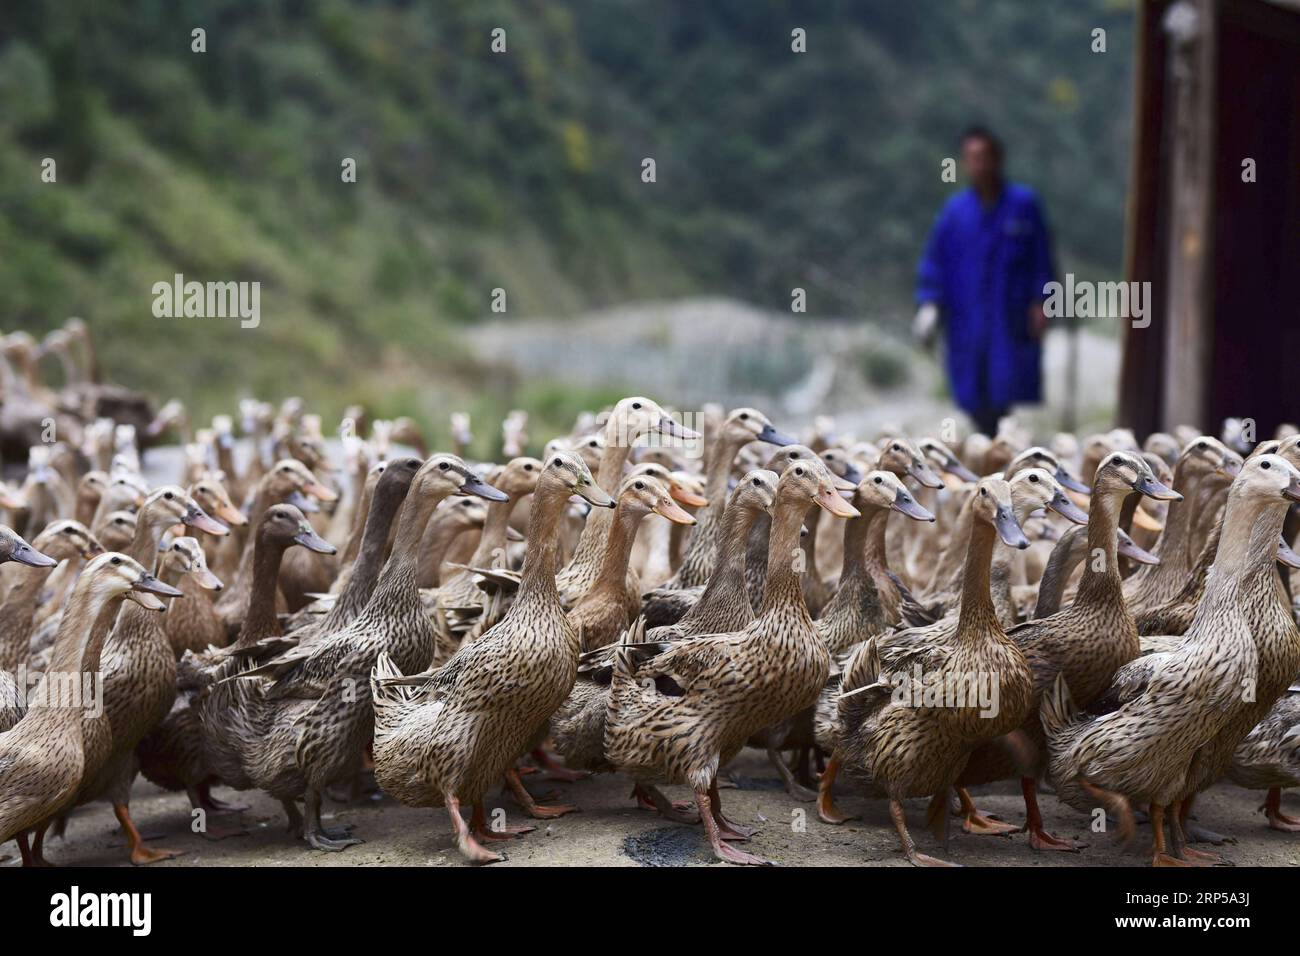 (181205) -- DANZHAI, Dec. 5, 2018 (Xinhua) -- Yang Zaiheng herds ducks at an egg-laying duck farm in Dingdong Village of Danzhai County, Qiandongnan Miao and Dong Autonomous Prefecture, southwest China s Guizhou Province, Dec. 4, 2018. Duck farmer Yang Zaiheng, 42, was once impoverished. After getting rid of poverty in 2015 through livestock and fish farming, Yang decided to promote the breeding industry in local area and help other impoverished households increase income. In 2017, Yang and other six households set up an egg-laying duck breeding cooperative with a duck egg production of over 8 Stock Photo